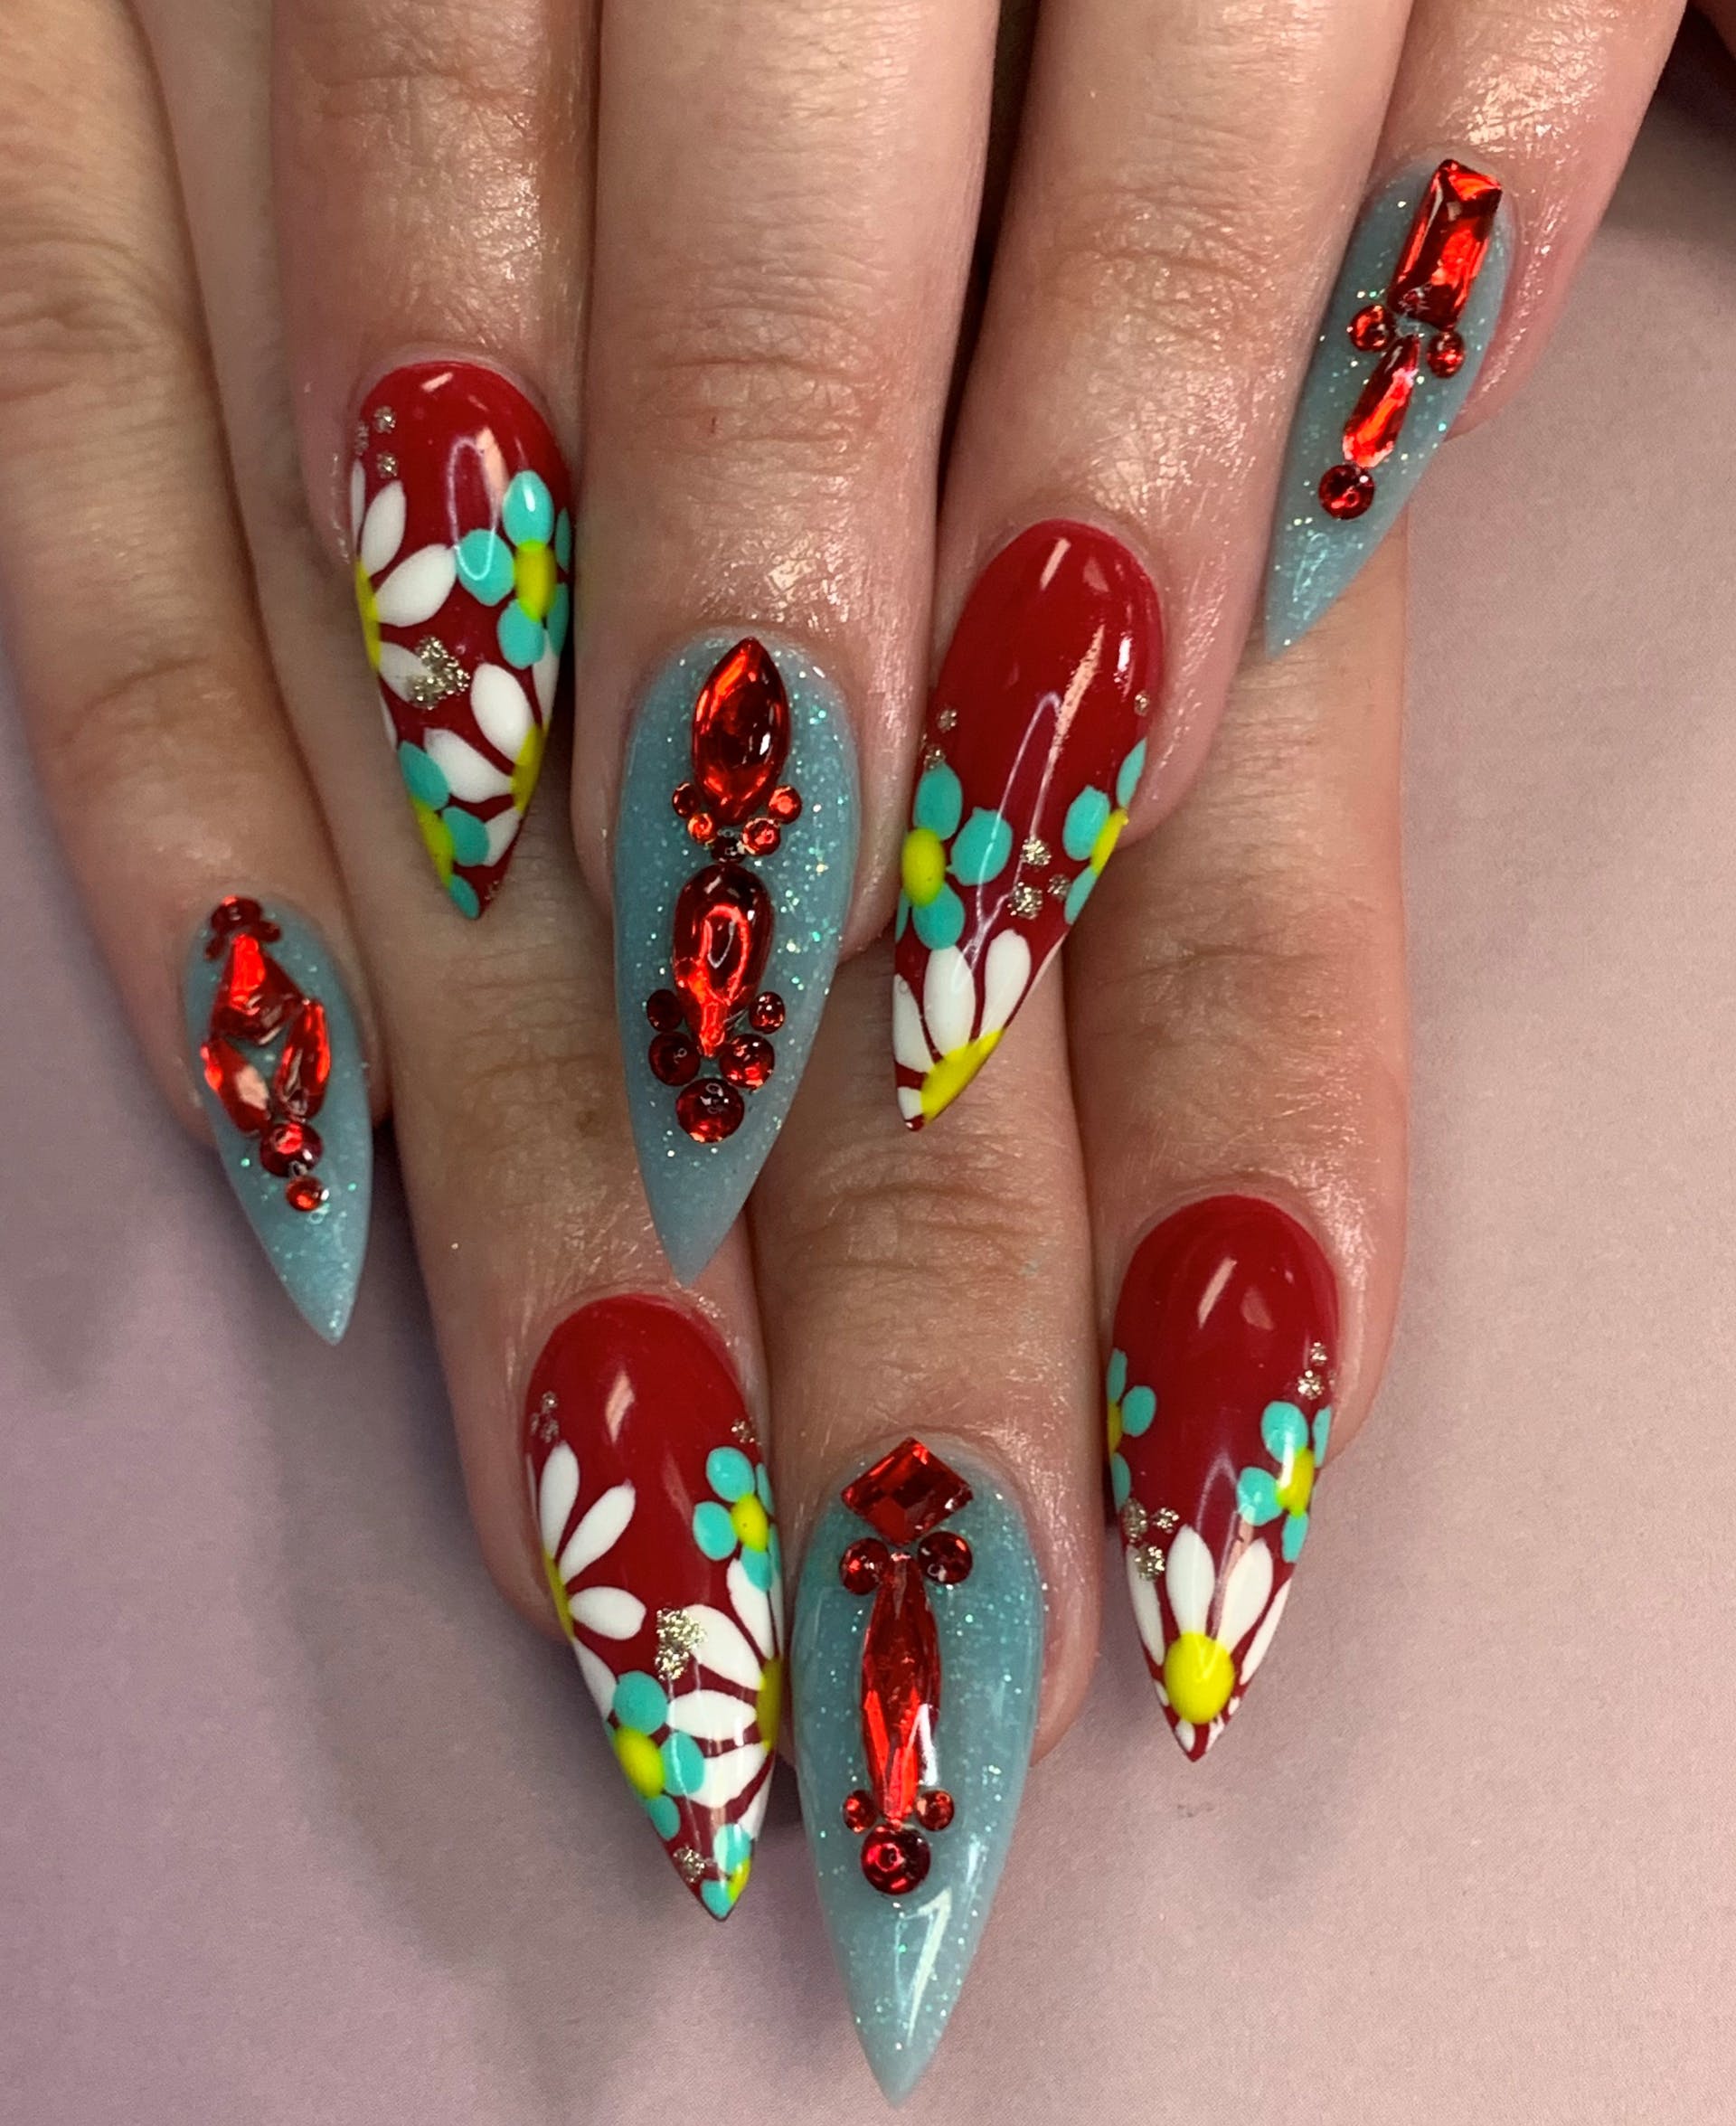 Red nails with daisy nail art and blue nails with red gems